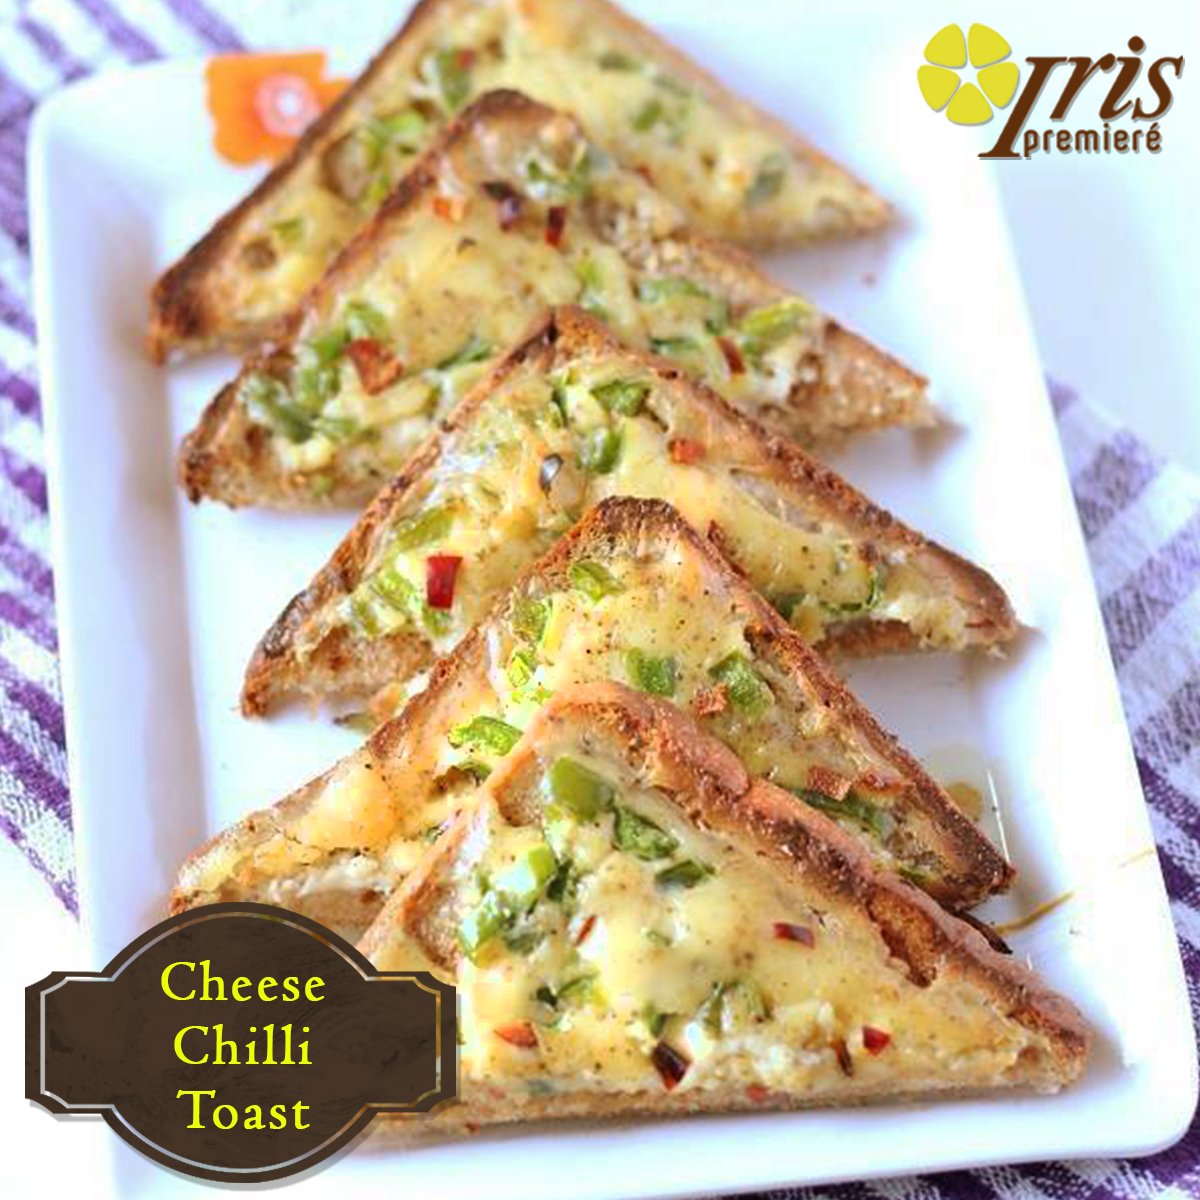 Indulge in these cheesy delight #cheesechillitoast, a nice cheesy treat for all the cheese lovers! at #IrisPremiere #Ahmednagar